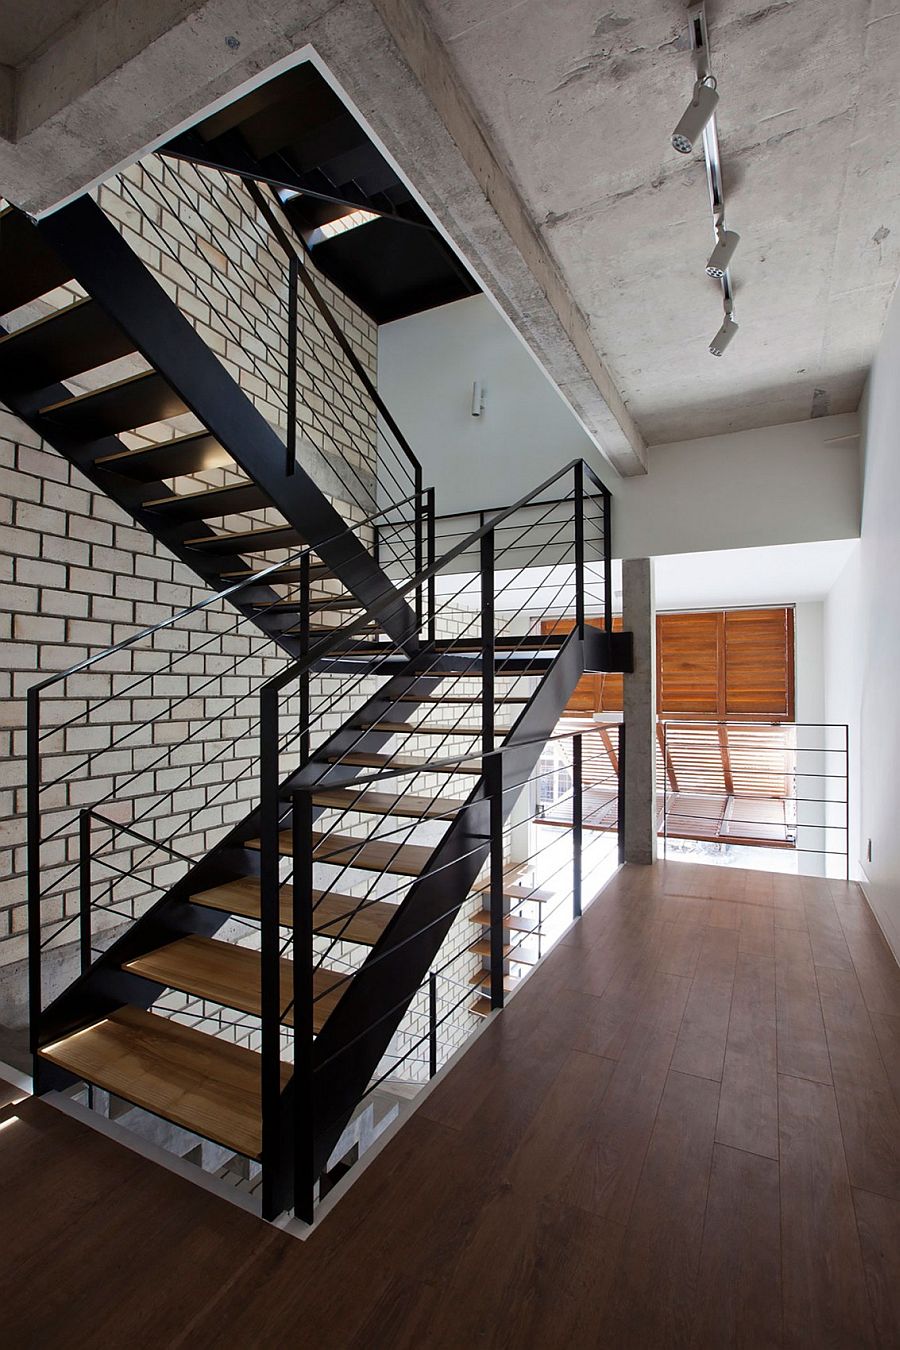 Industrial staircase connects the various levels of the home